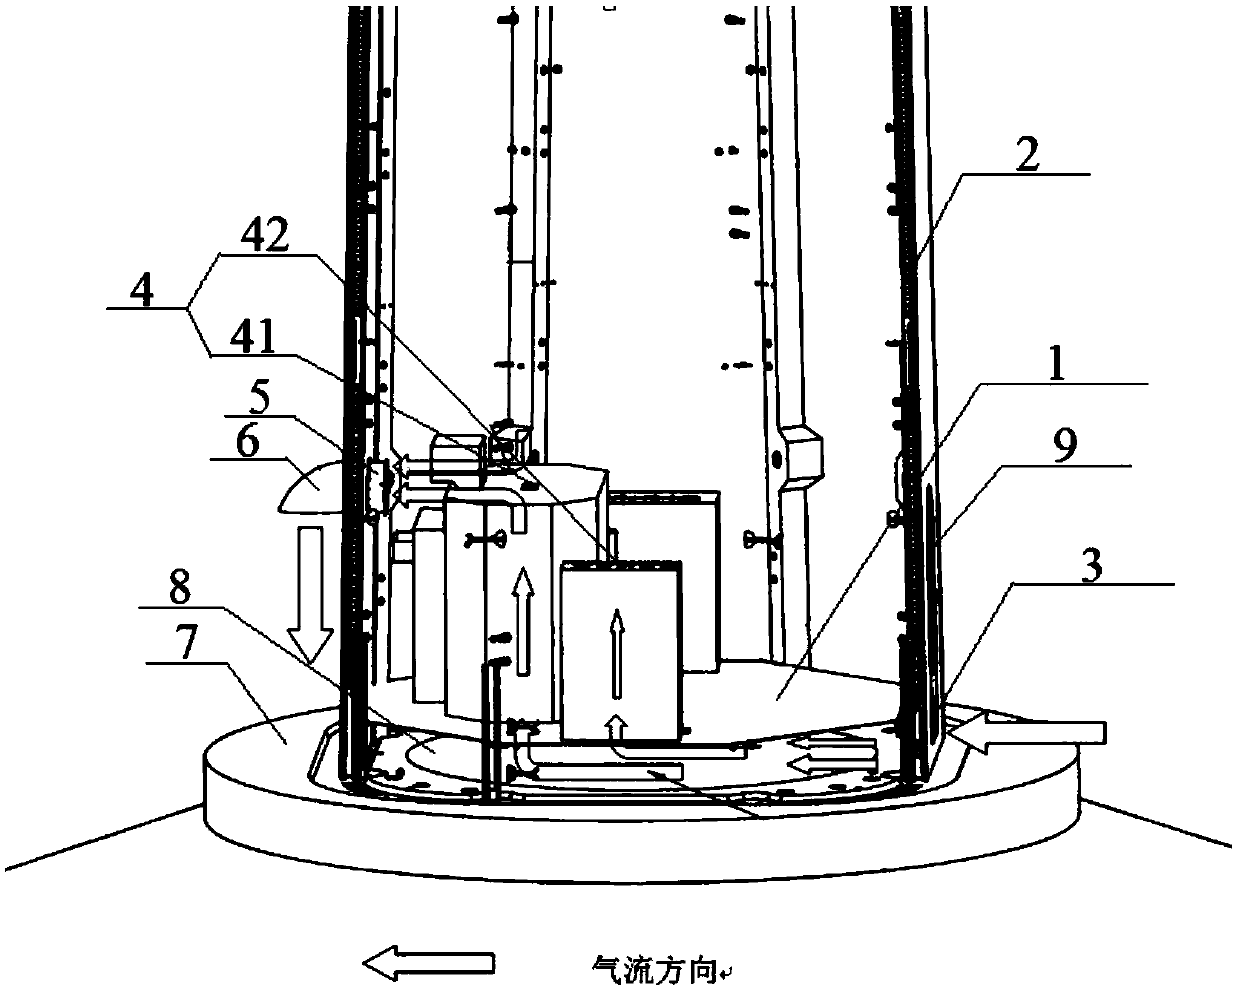 Heat dissipation device for tower drum of wind turbine generator